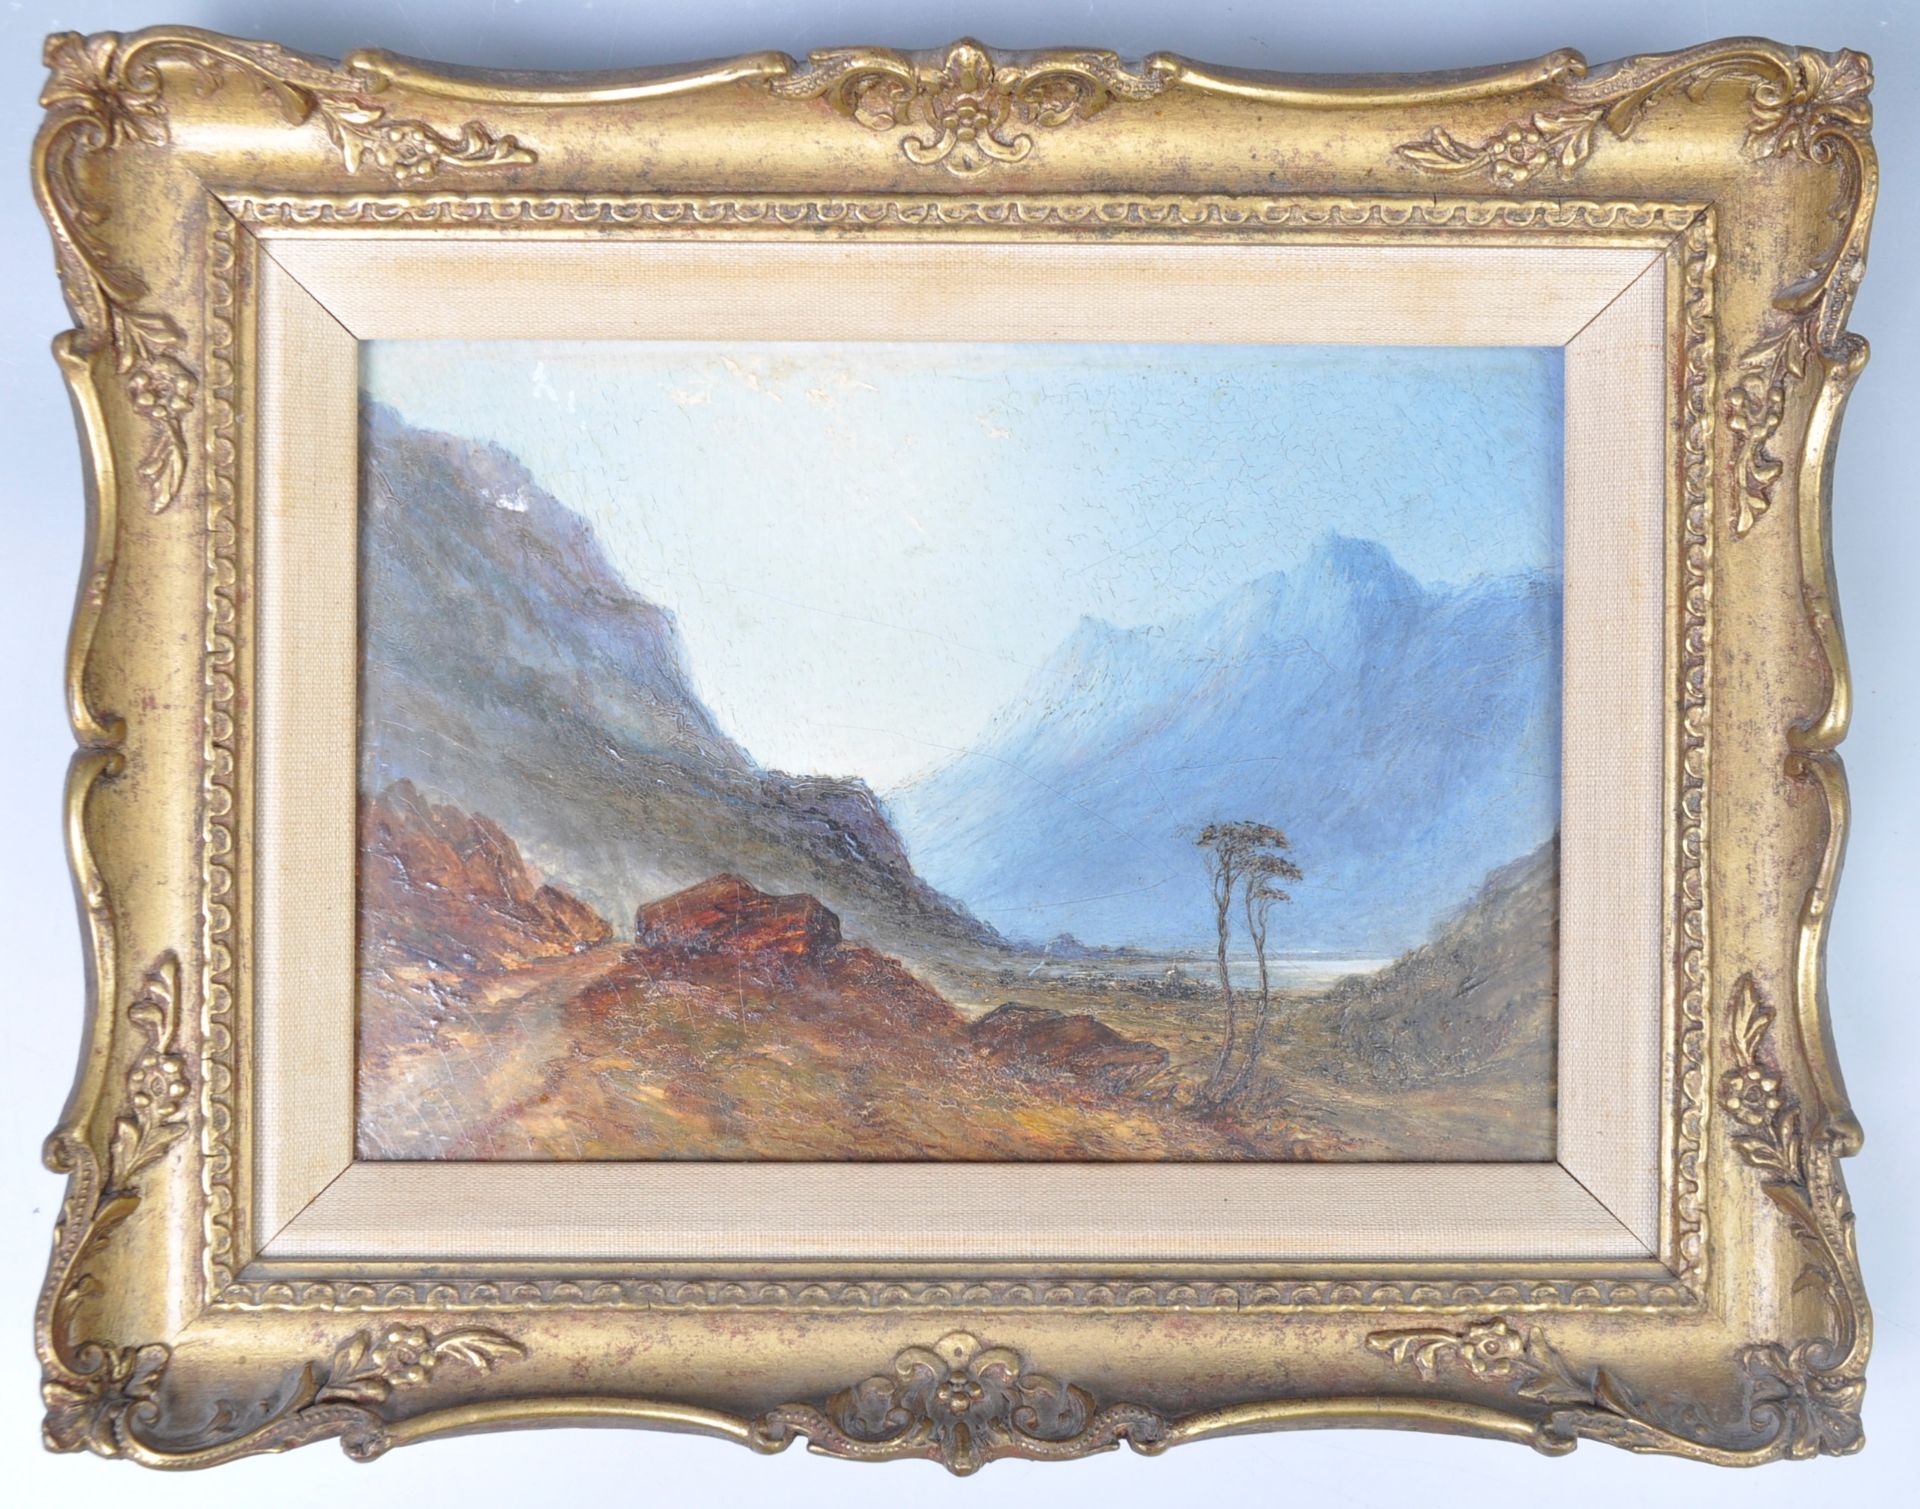 OIL ON BOARD PAINTING OF HIGHLAND SCENE BY JAMES WILLIAMSON